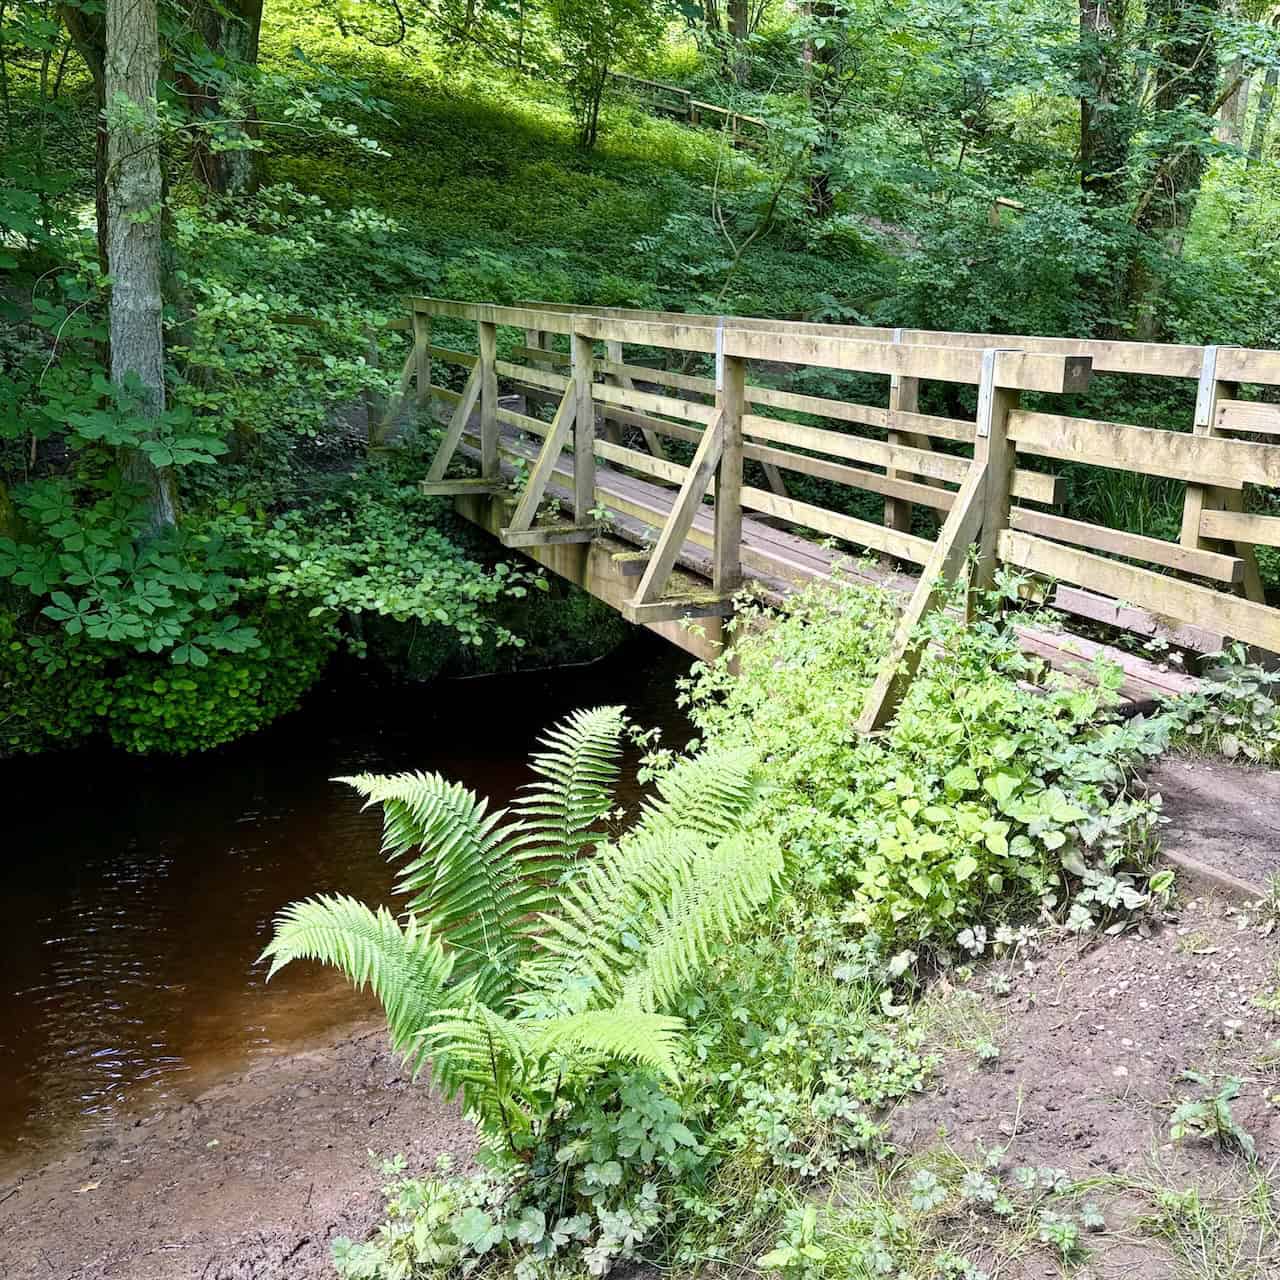 A footbridge crosses Cod Beck in a small, narrow valley on the eastern side of Osmotherley.